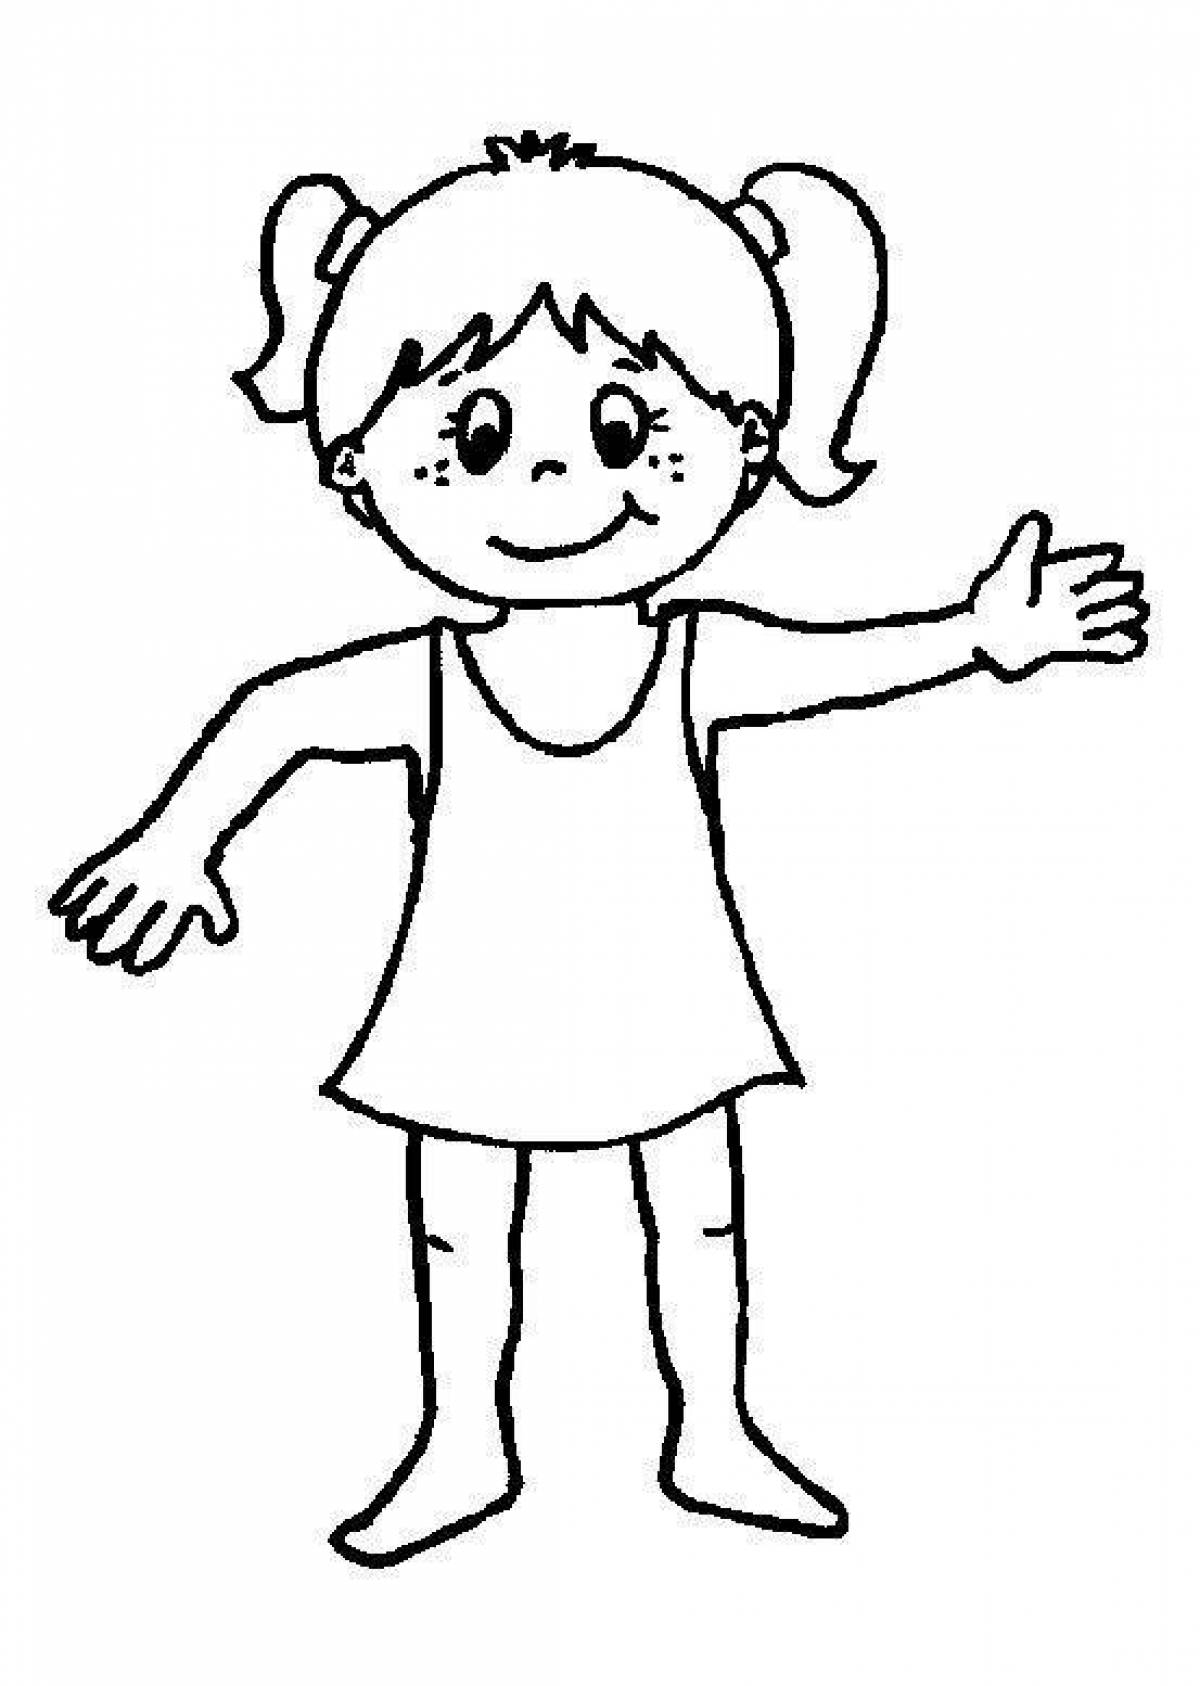 Exciting coloring pages of body parts for kids